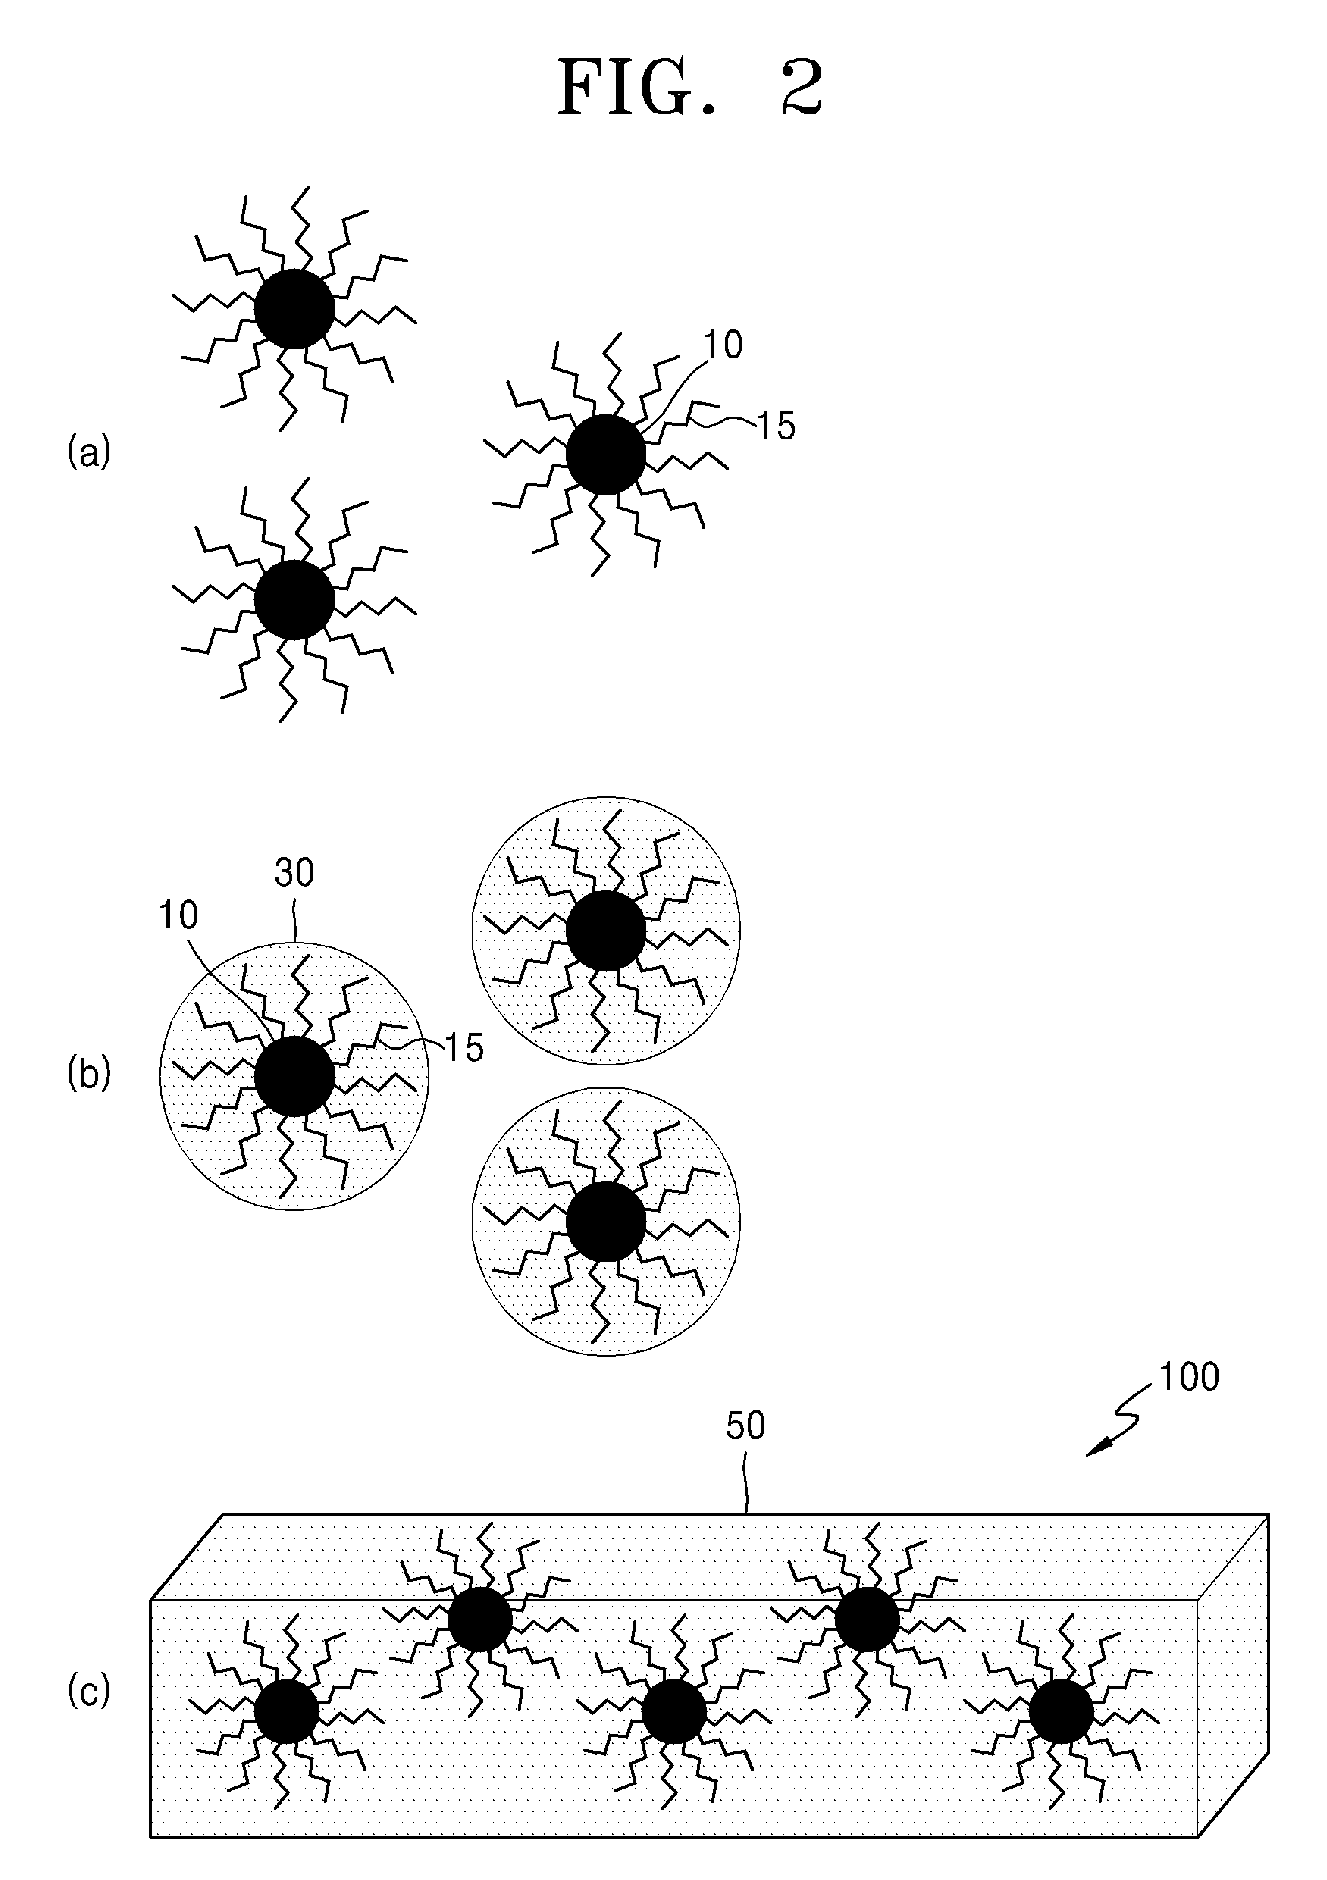 Nanocomposite material and method of manufacturing the same comprising forming an inorganic matrix by sol-gel reaction